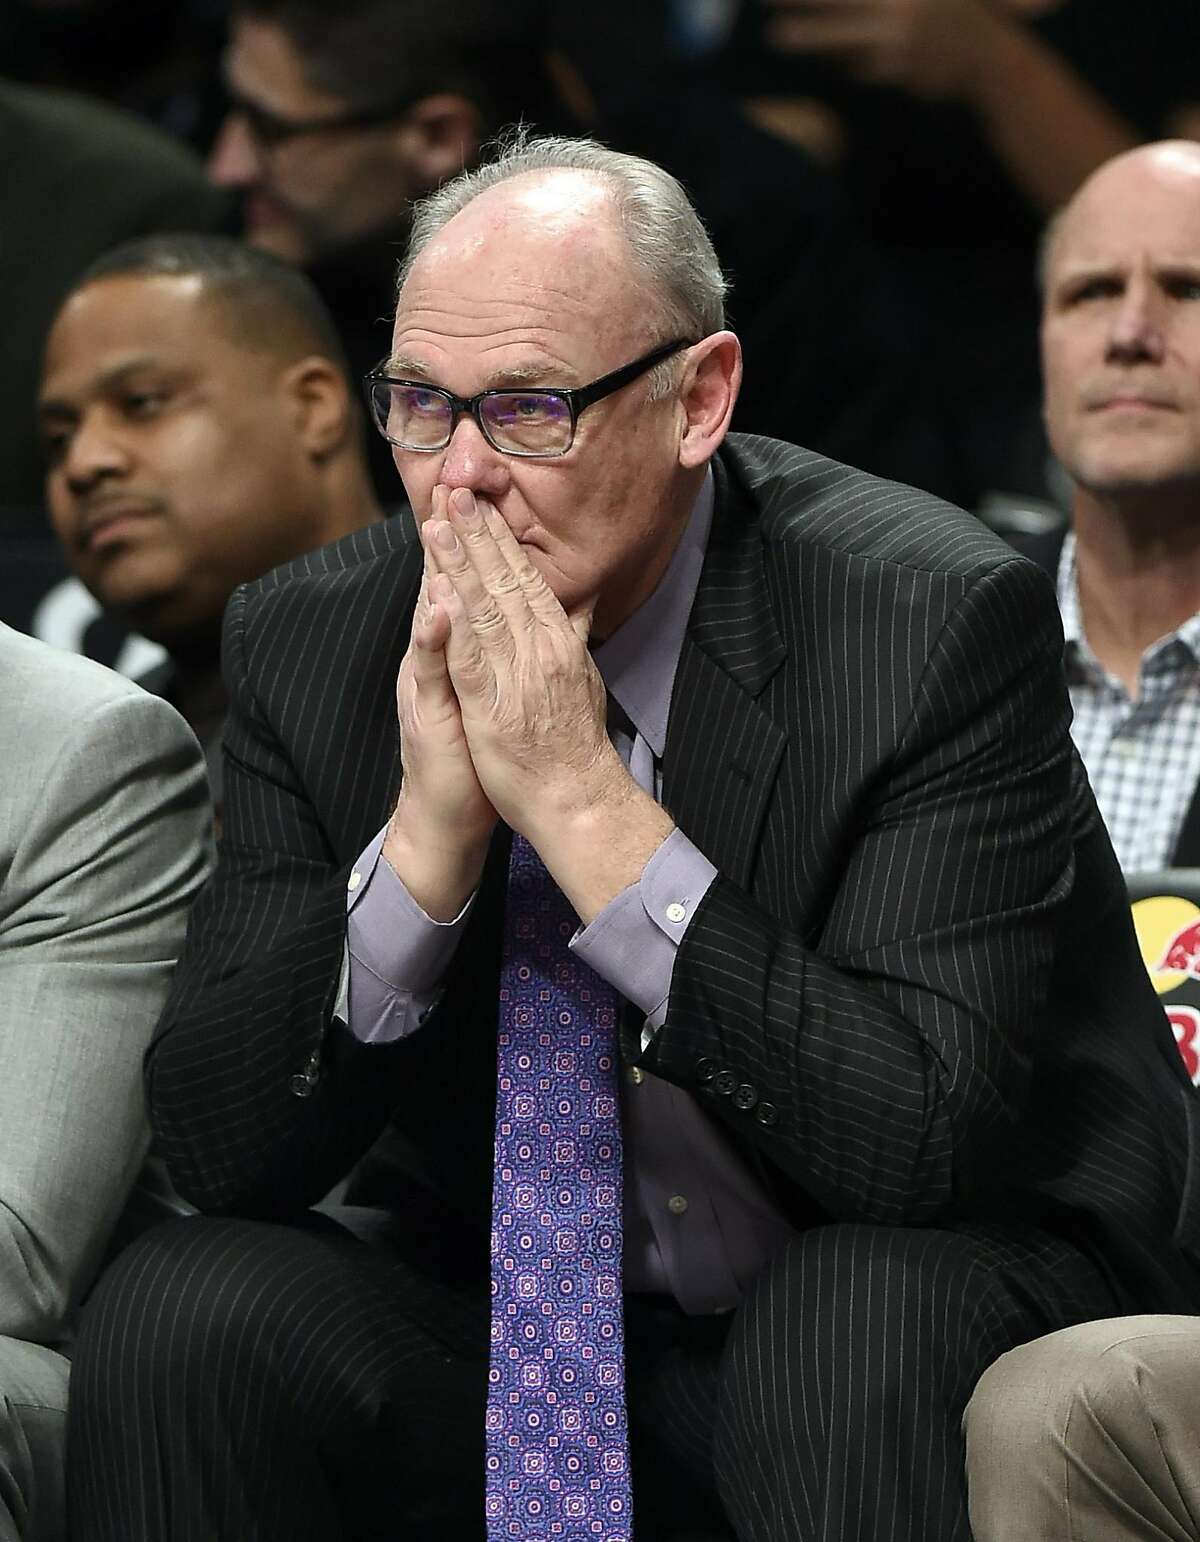 FILE - In this Feb. 5, 2016 file photo, Sacramento Kings coach George Karl reacts to his team's play during the second half of an NBA basketball game against the Brooklyn Nets, in New York. The Sacramento Kings have fired coach George Karl after his first full season with the team, setting the stage for the team to hire its ninth coach since last making the playoffs in 2006. General manager Vlade Divac announced the move Thursday, April 14, 2016, a day after the Kings wrapped up another disappointing season with a 33-49 record. (AP Photo/Kathy Kmonicek, File)